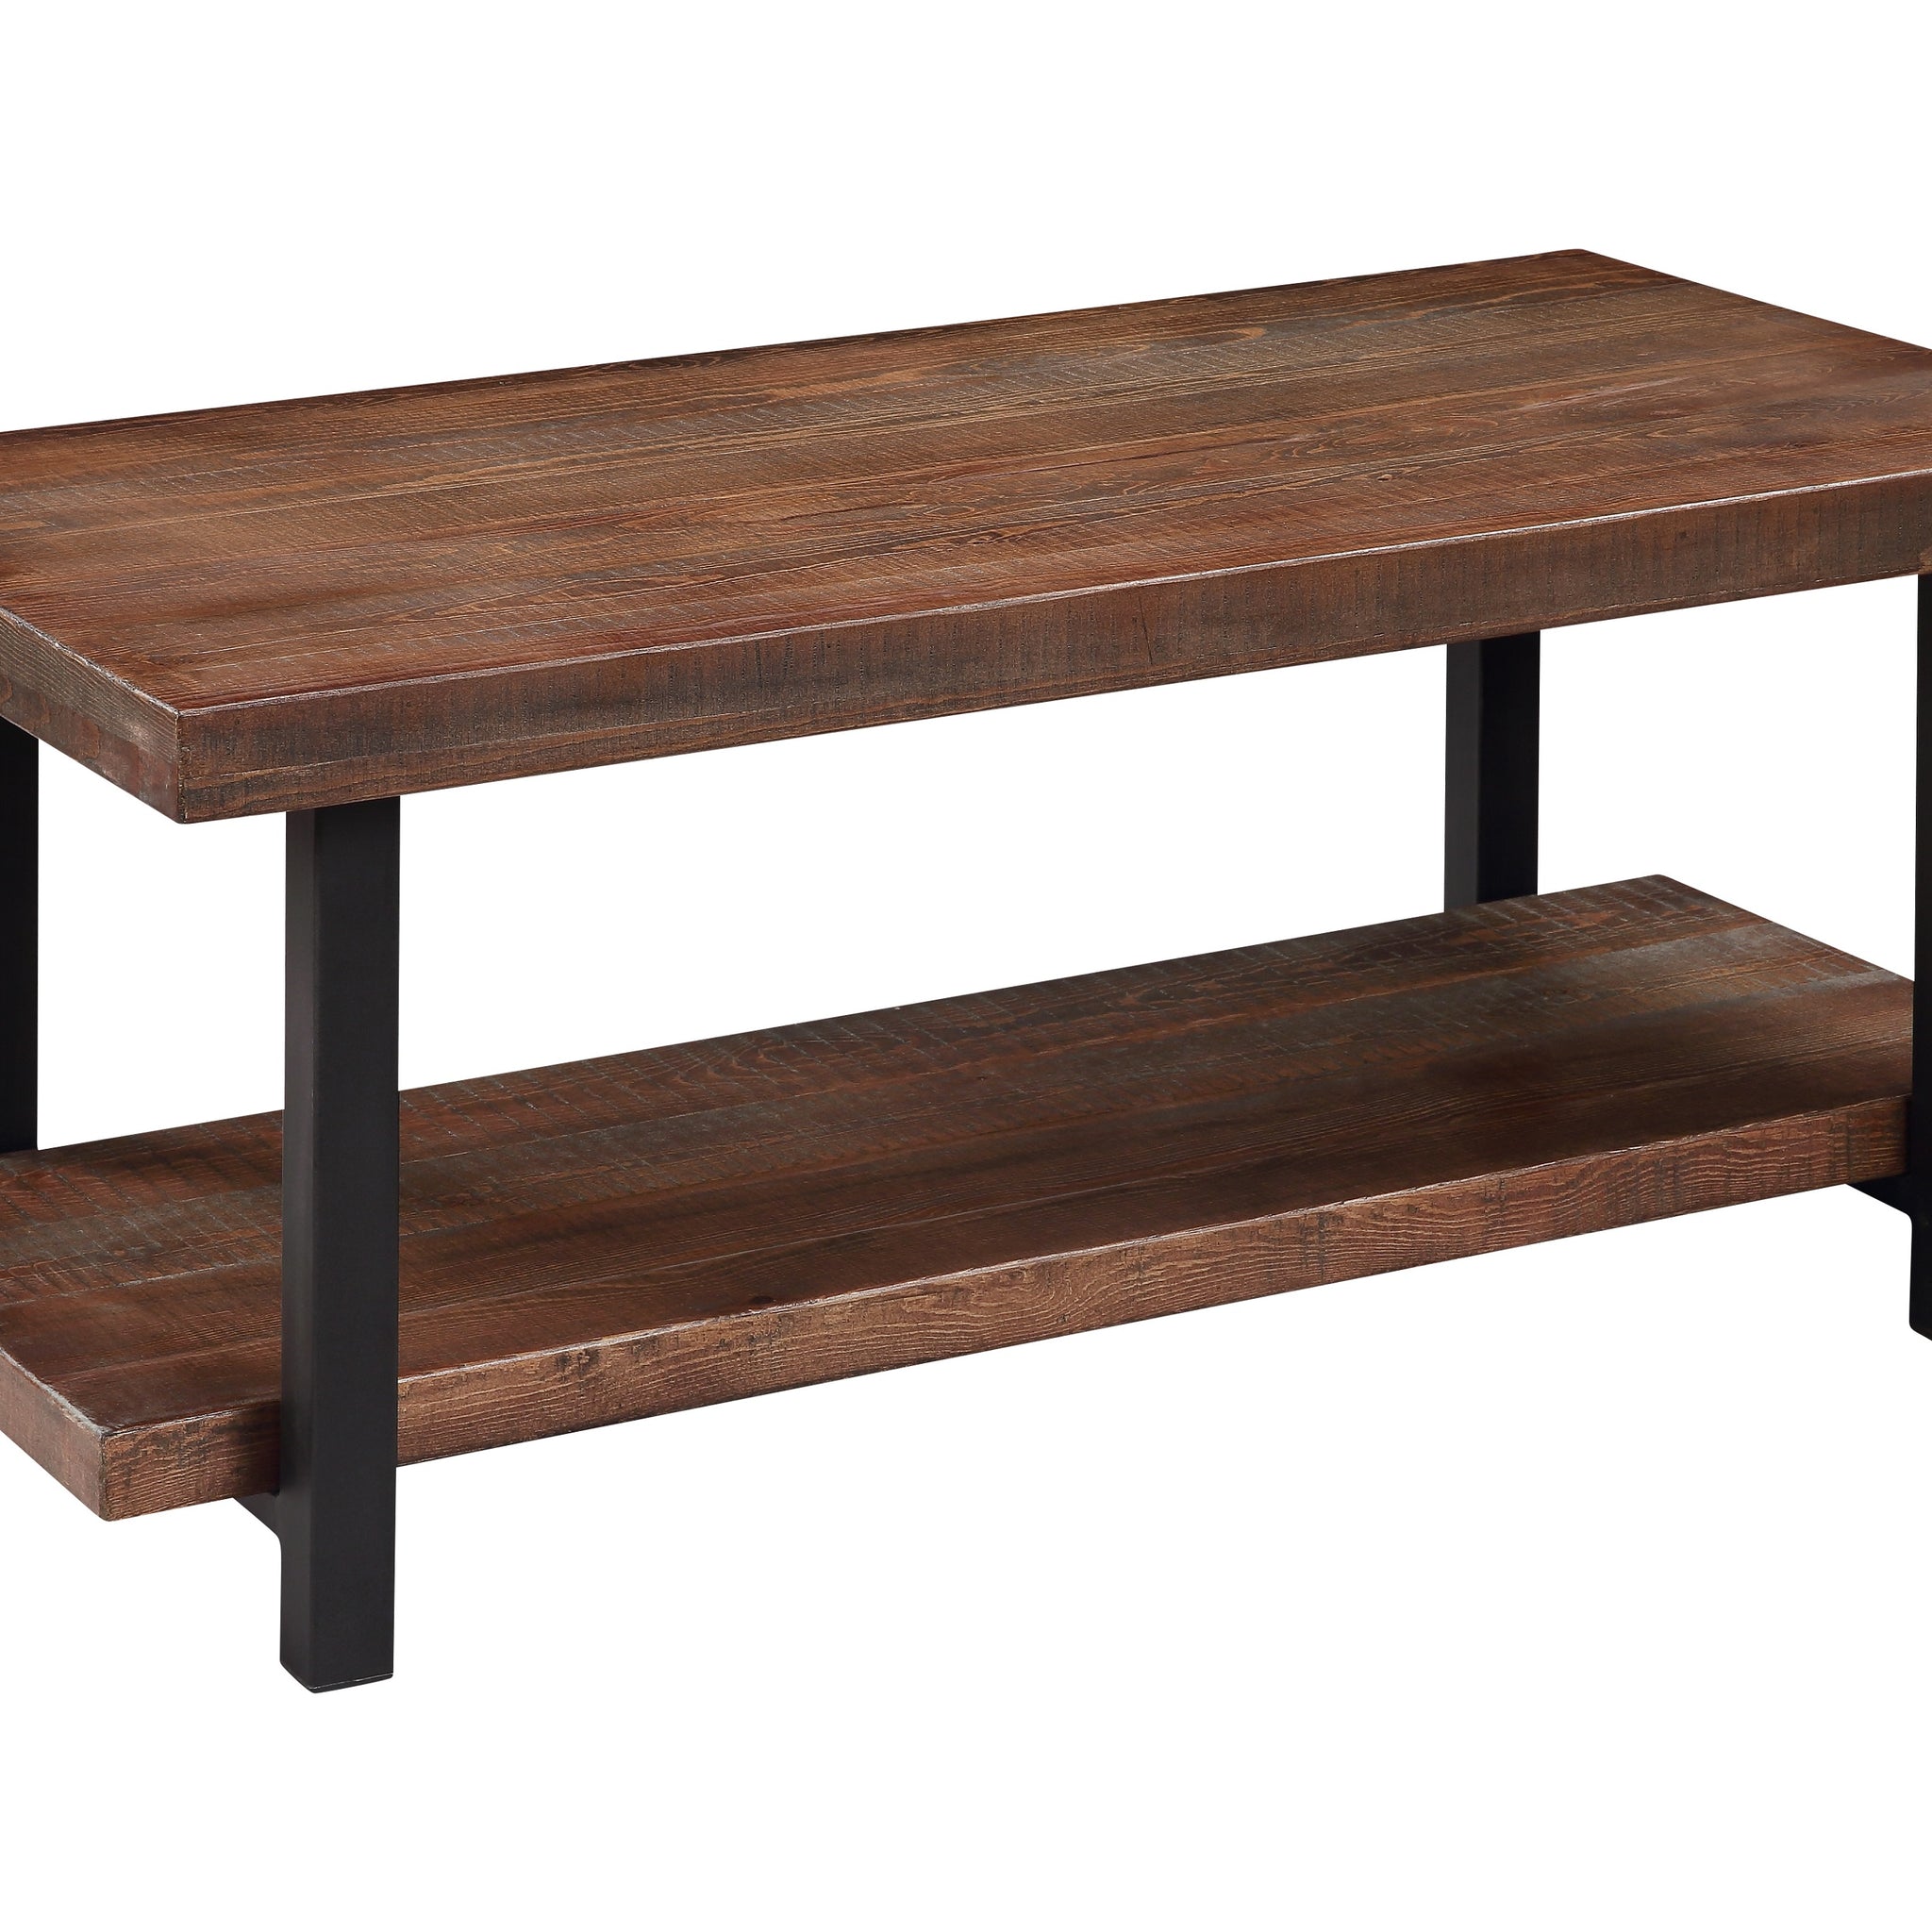 Idustrial Coffee Table Solid Wood + MDF and Iron Frame with Open Shelf